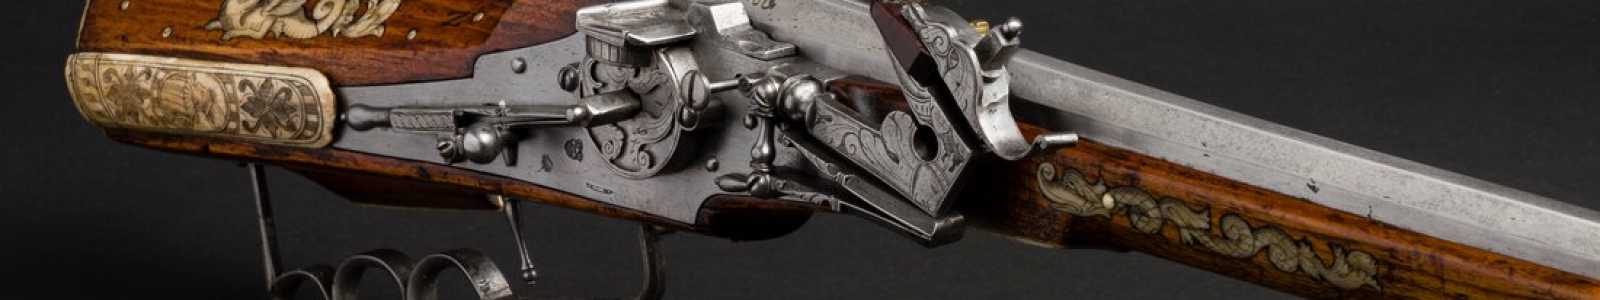 A94: Fine Antique and Modern Firearms